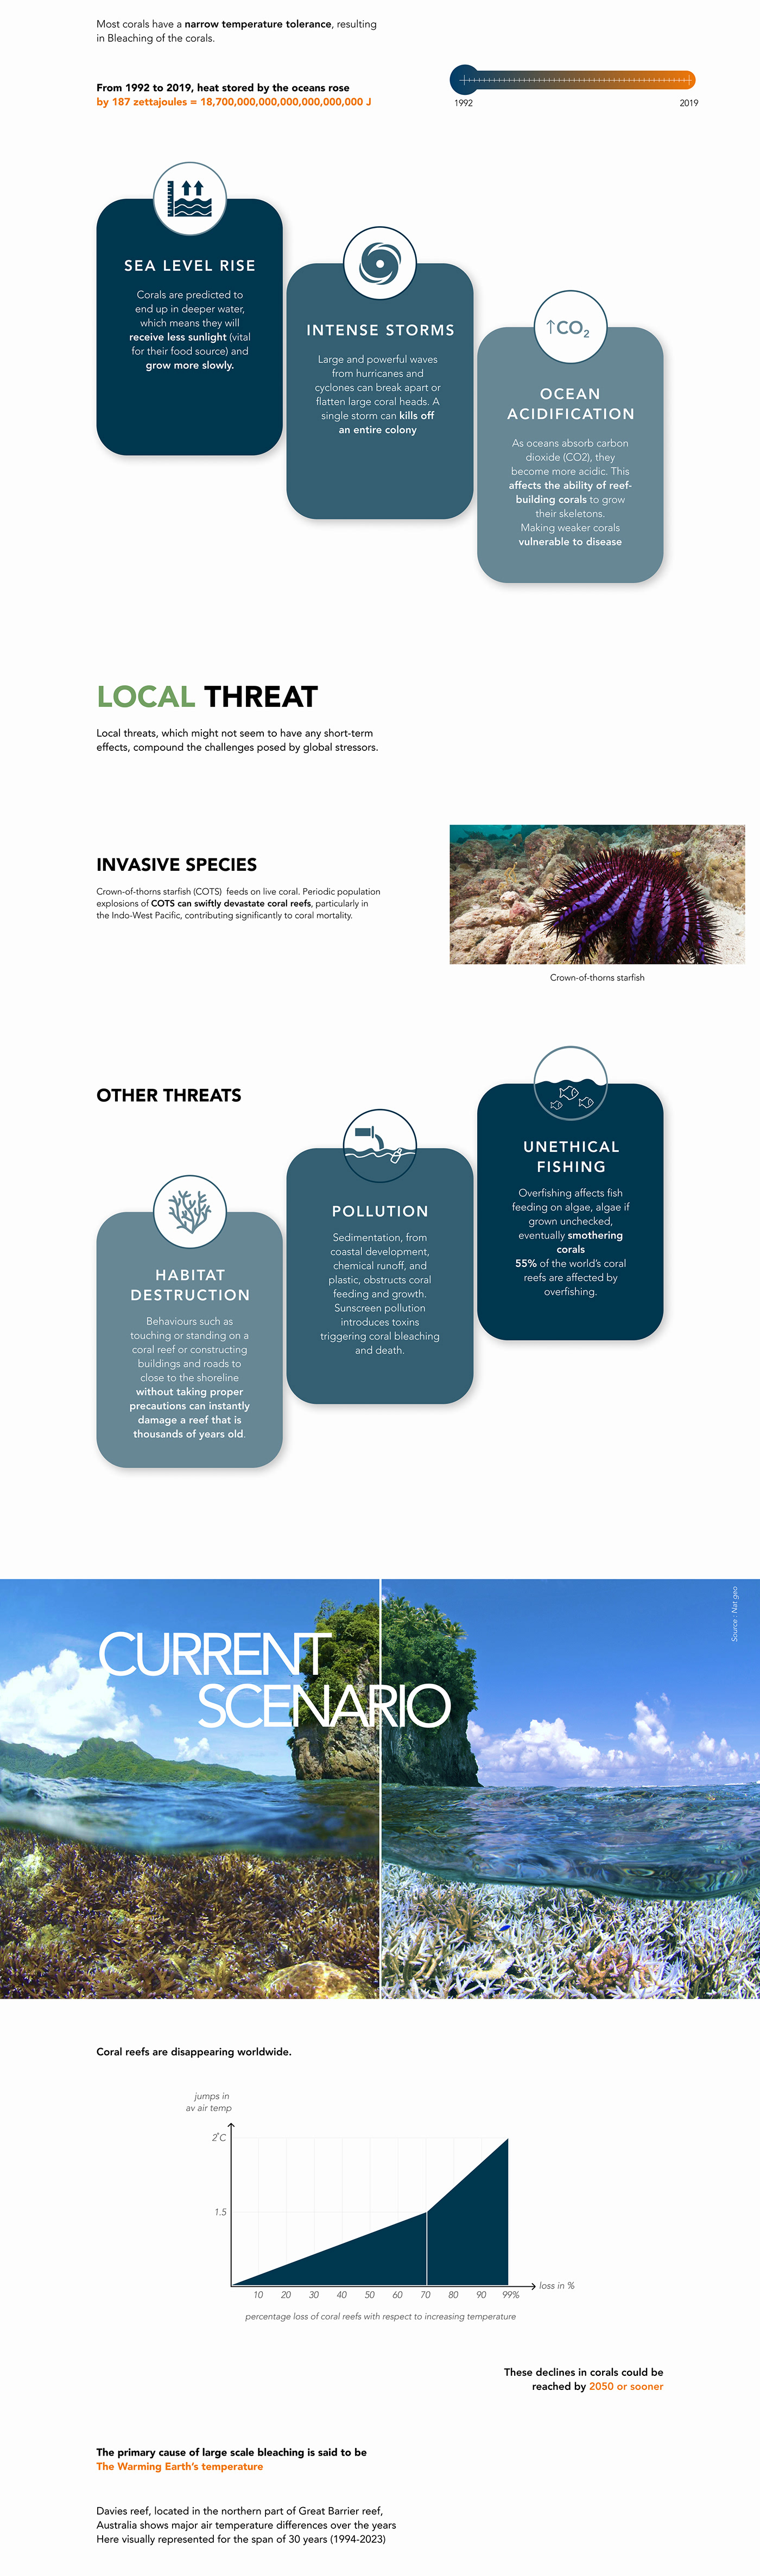 data visualization infographic coral climate change environment Figma research Case Study information design